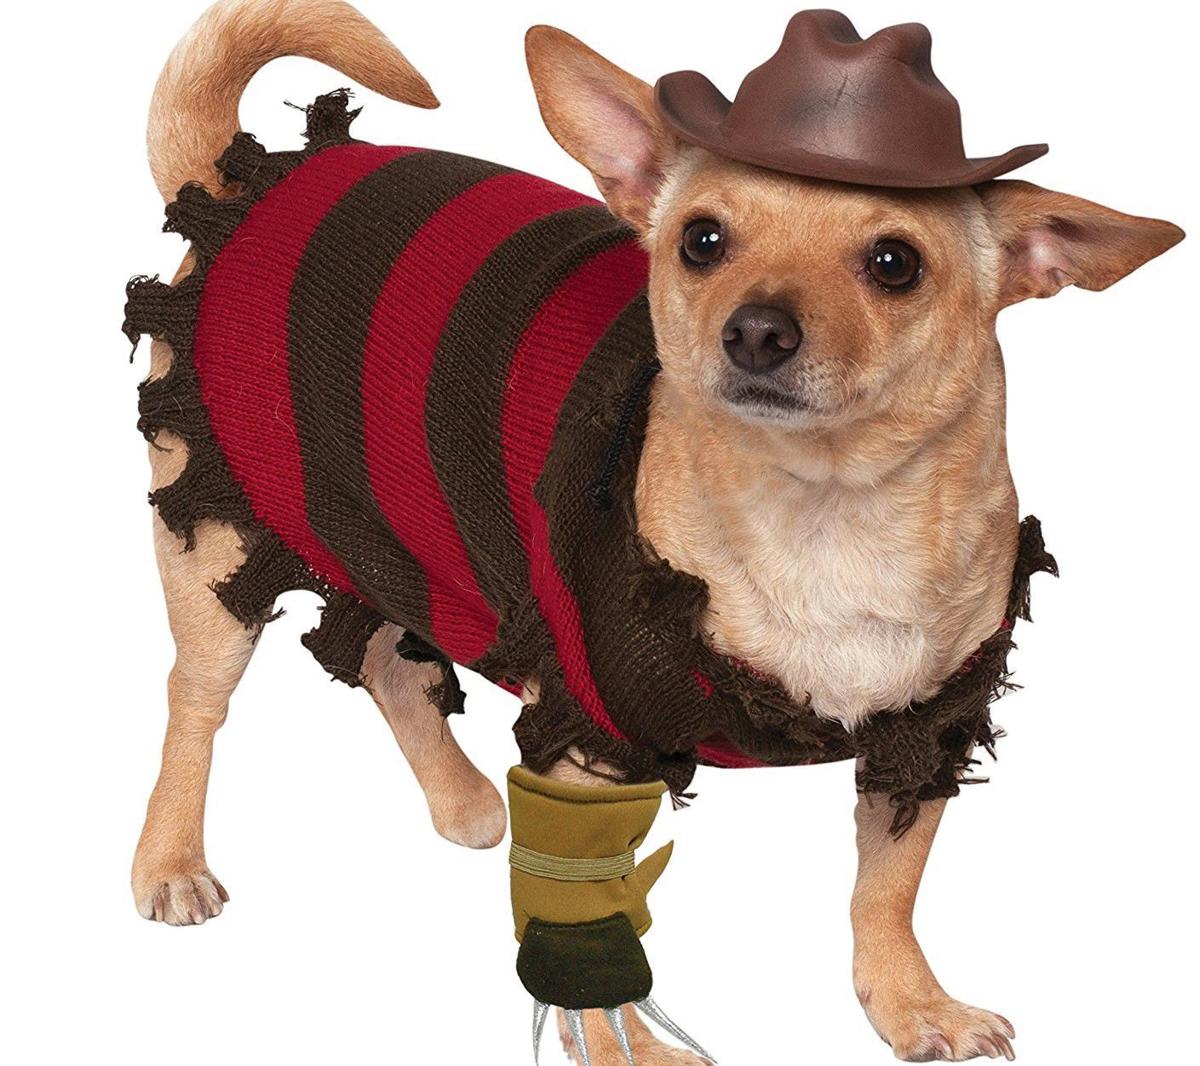 Dog Can Be Freddy Krueger For